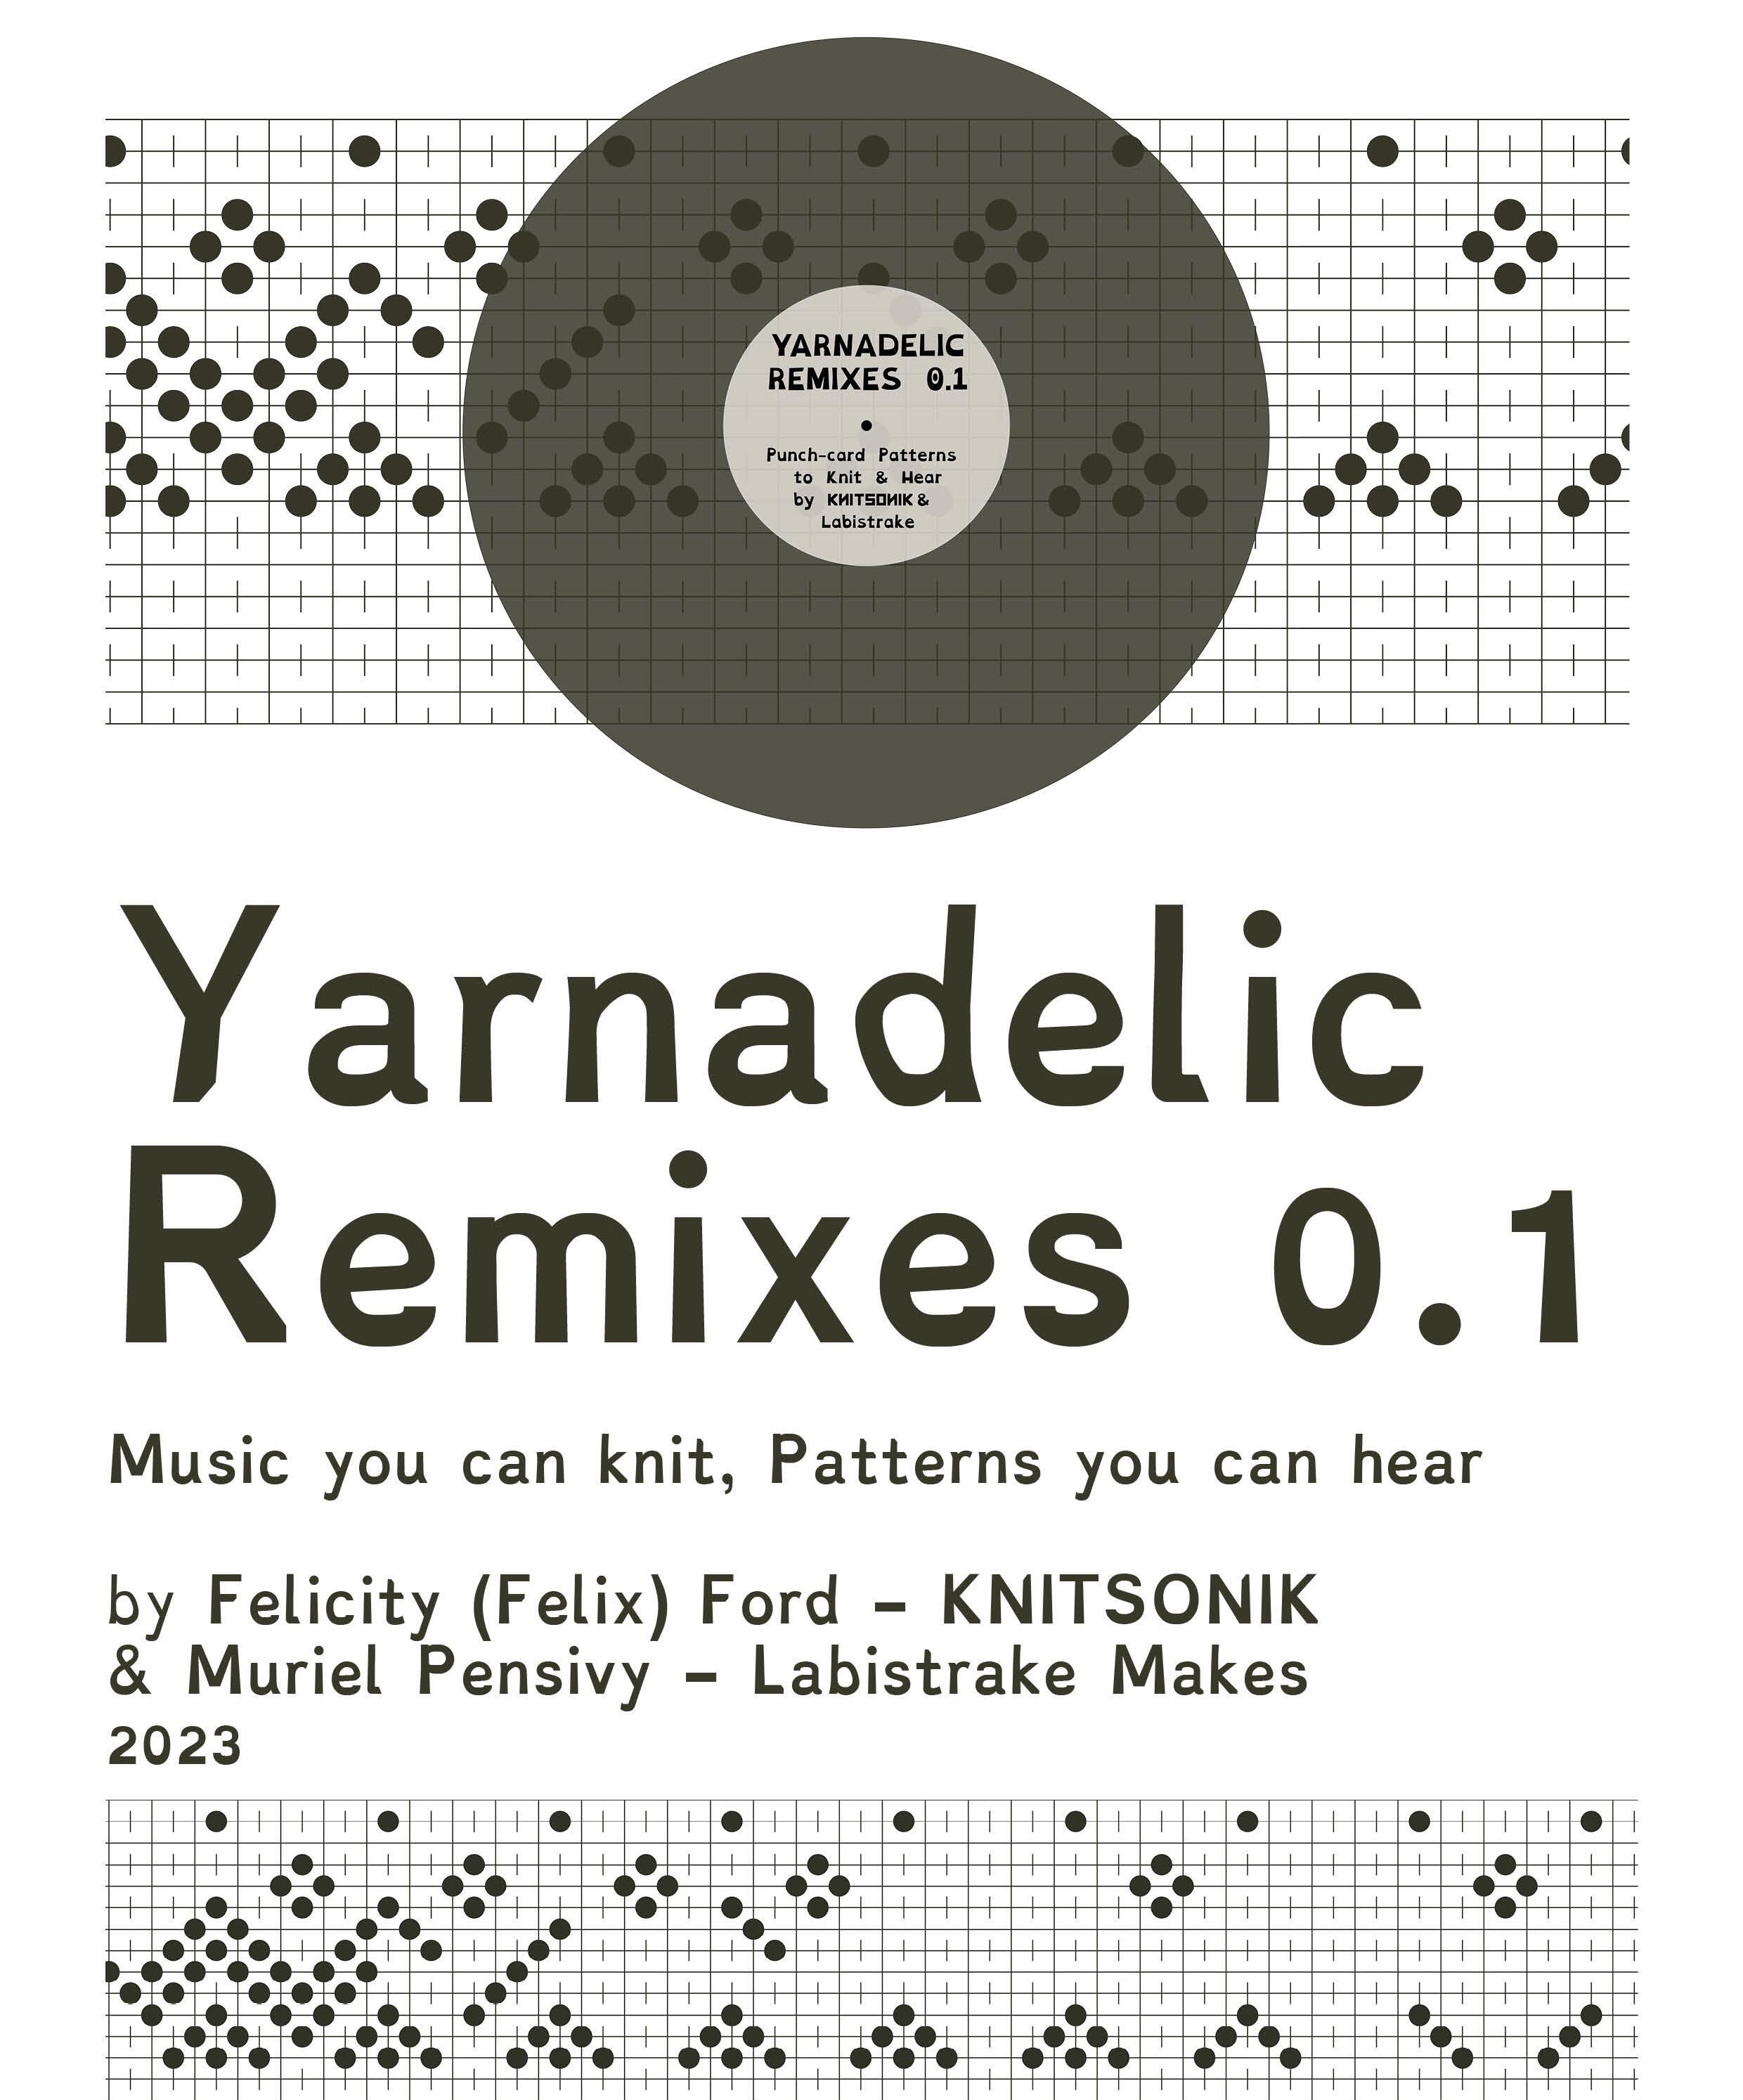 Yarnadelic Remixes 0.1: Music you can knit, patterns you can hear, by Felicity (Felix) Ford - KNITSONIK, and Muriel Pensivy - Labistrake Makes, 2023